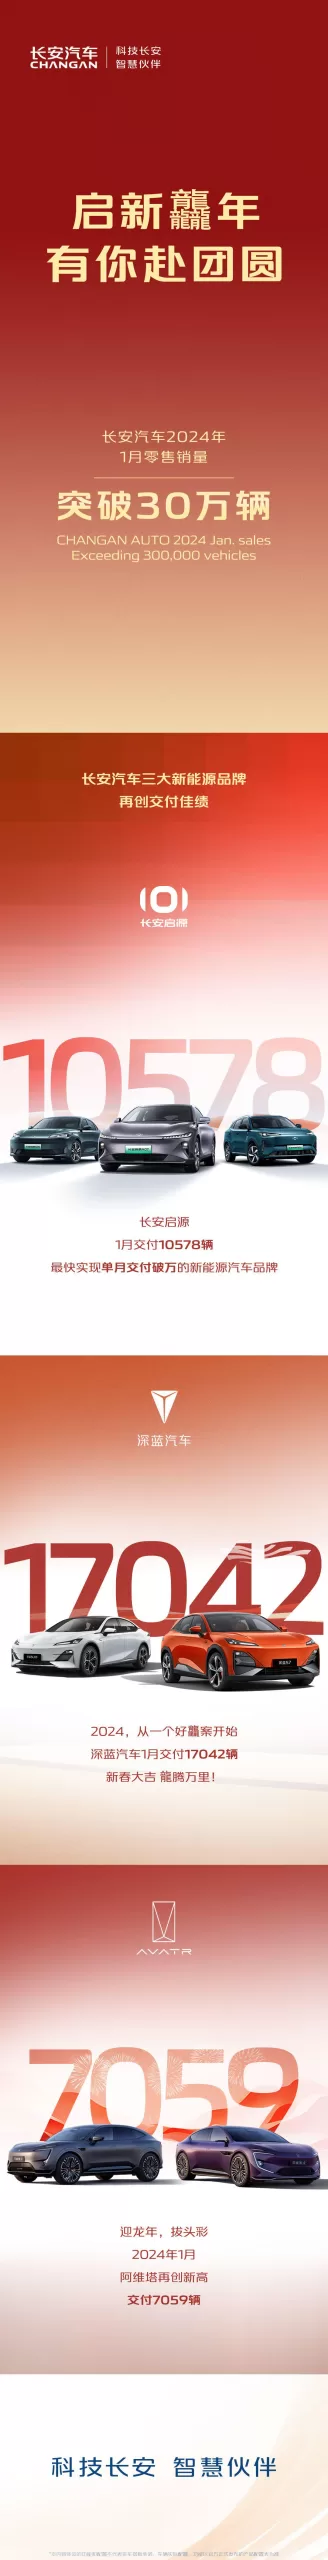 Changan Motors Exceeds 300,000 January Sales, Aims for 2.8 Million in 2024